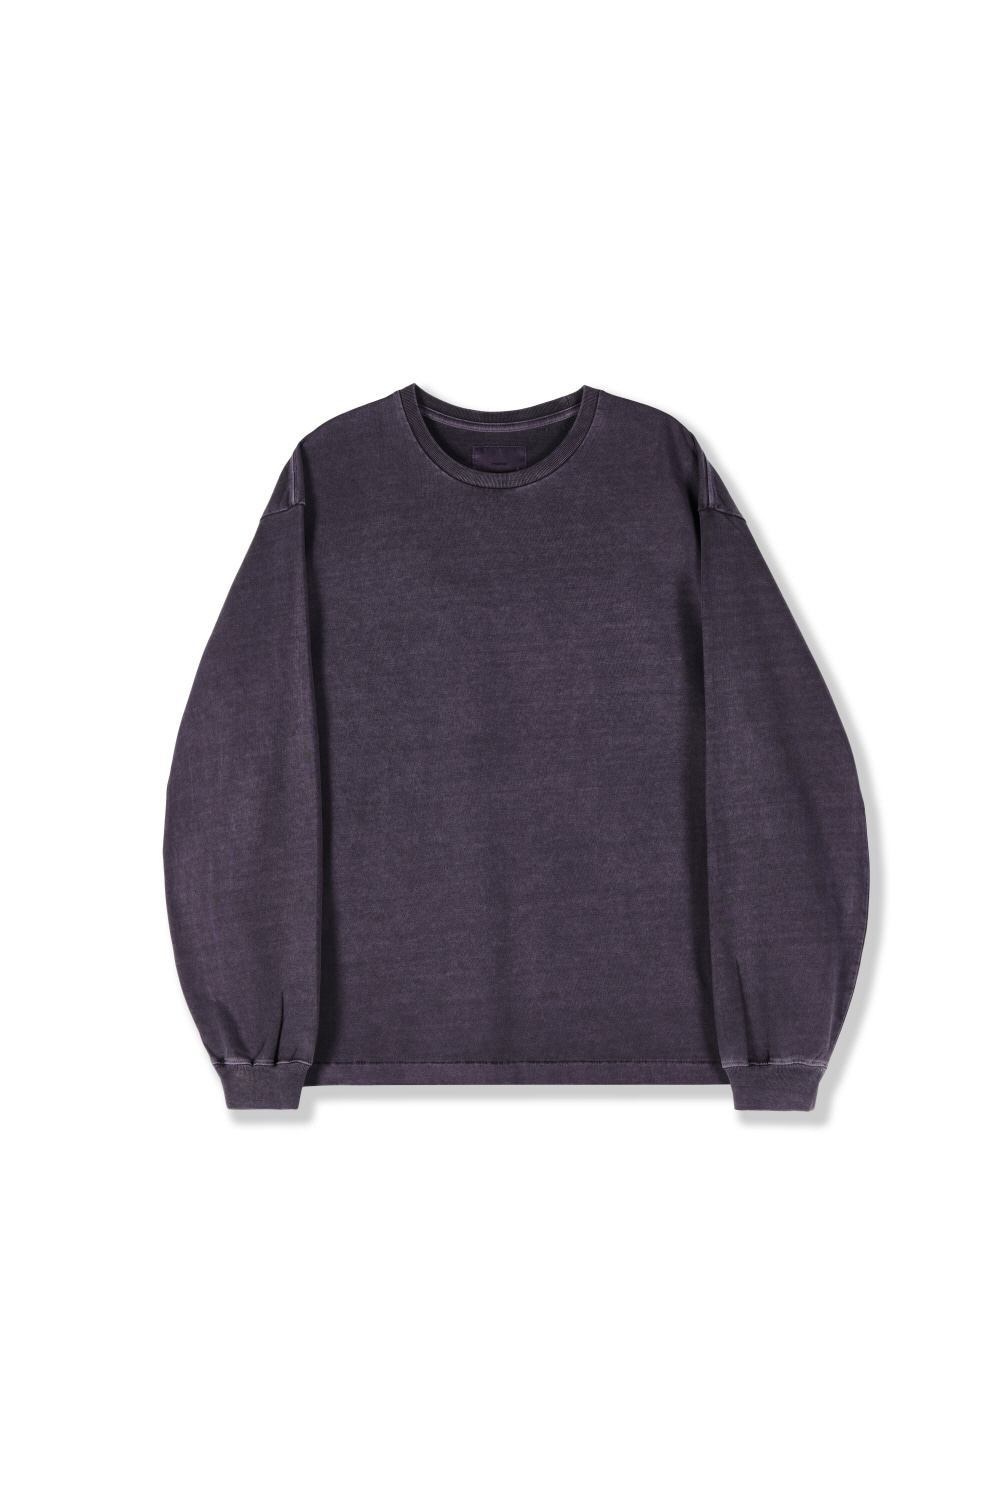 pigment dyed long sleeves_ash purple